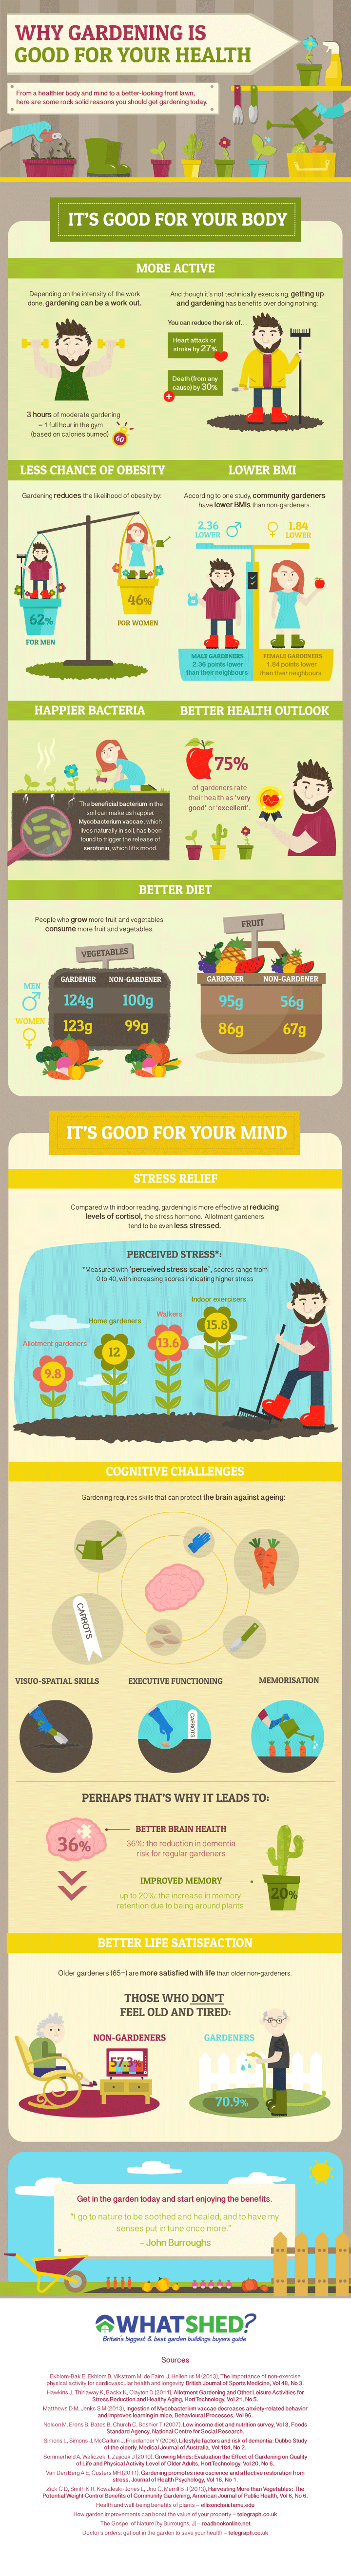 Why Gardening Is Good For Your Health